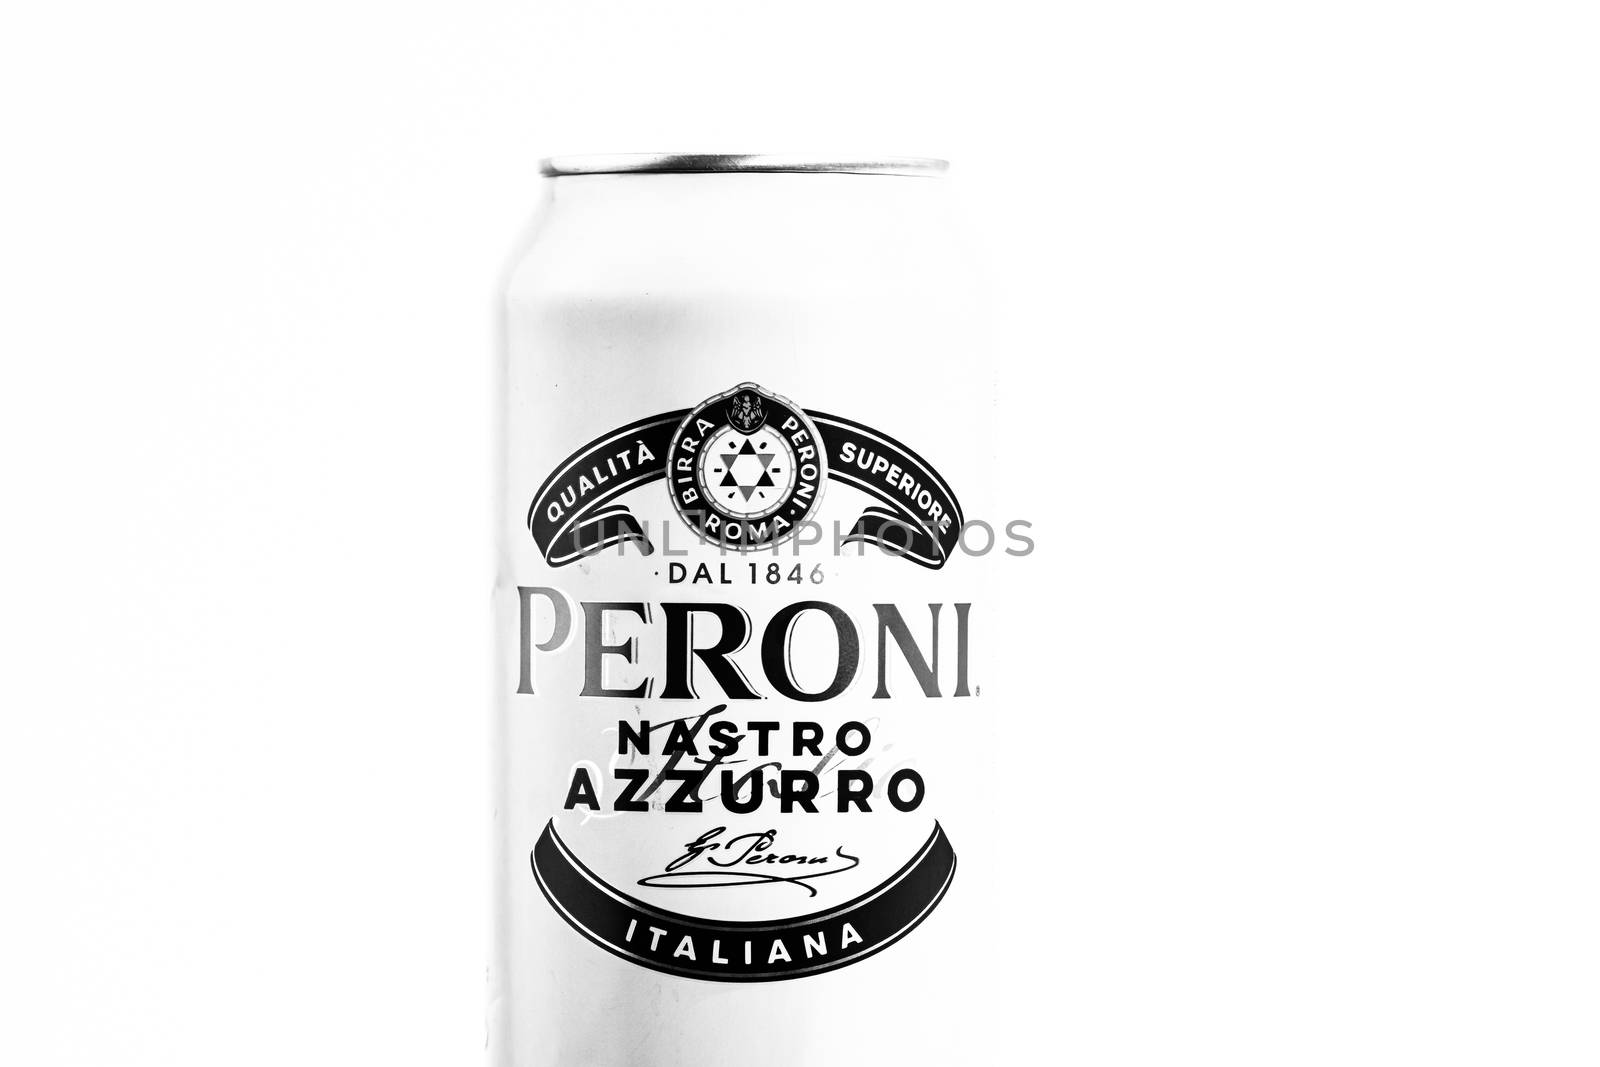 Peroni Nastro Azzurro, a premium lager beer produced since 1963 by Peroni Brewery located in Rome, Italy. Studio photo shoot in Bucharest, Romania, 2020